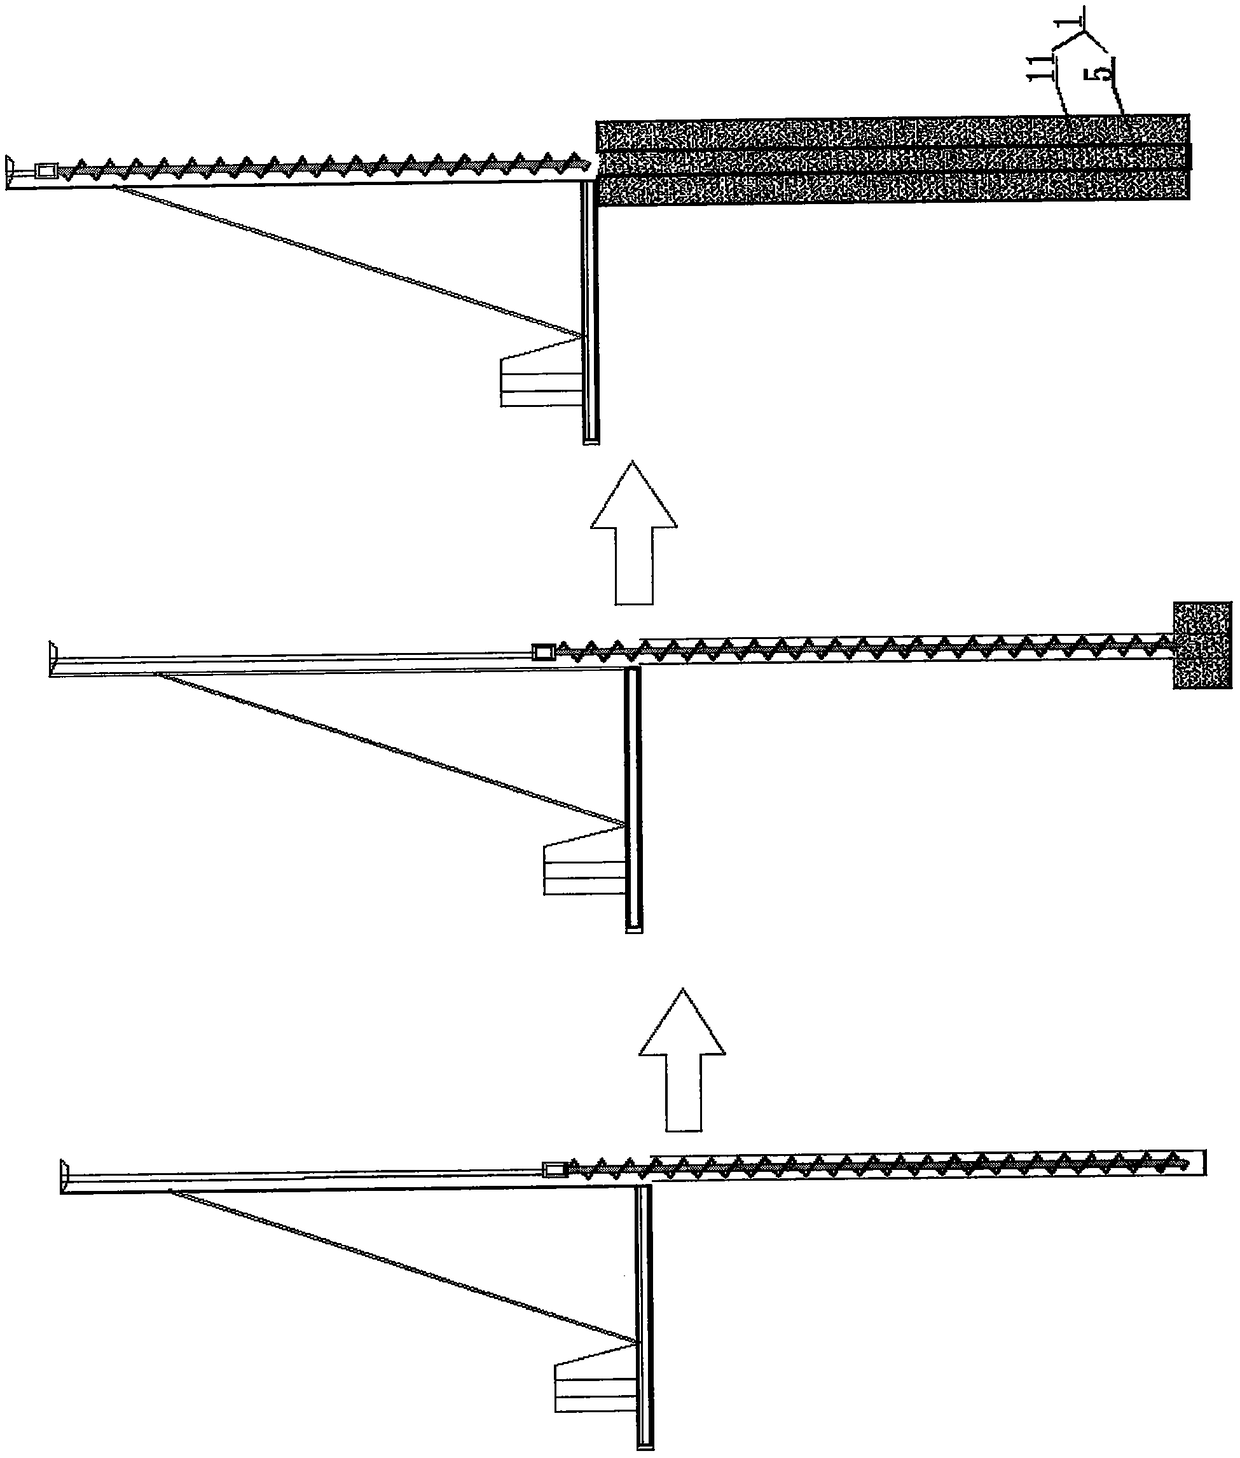 A method of forming a water-blocking diaphragm wall with row piles and plug-in pile-plate combined support